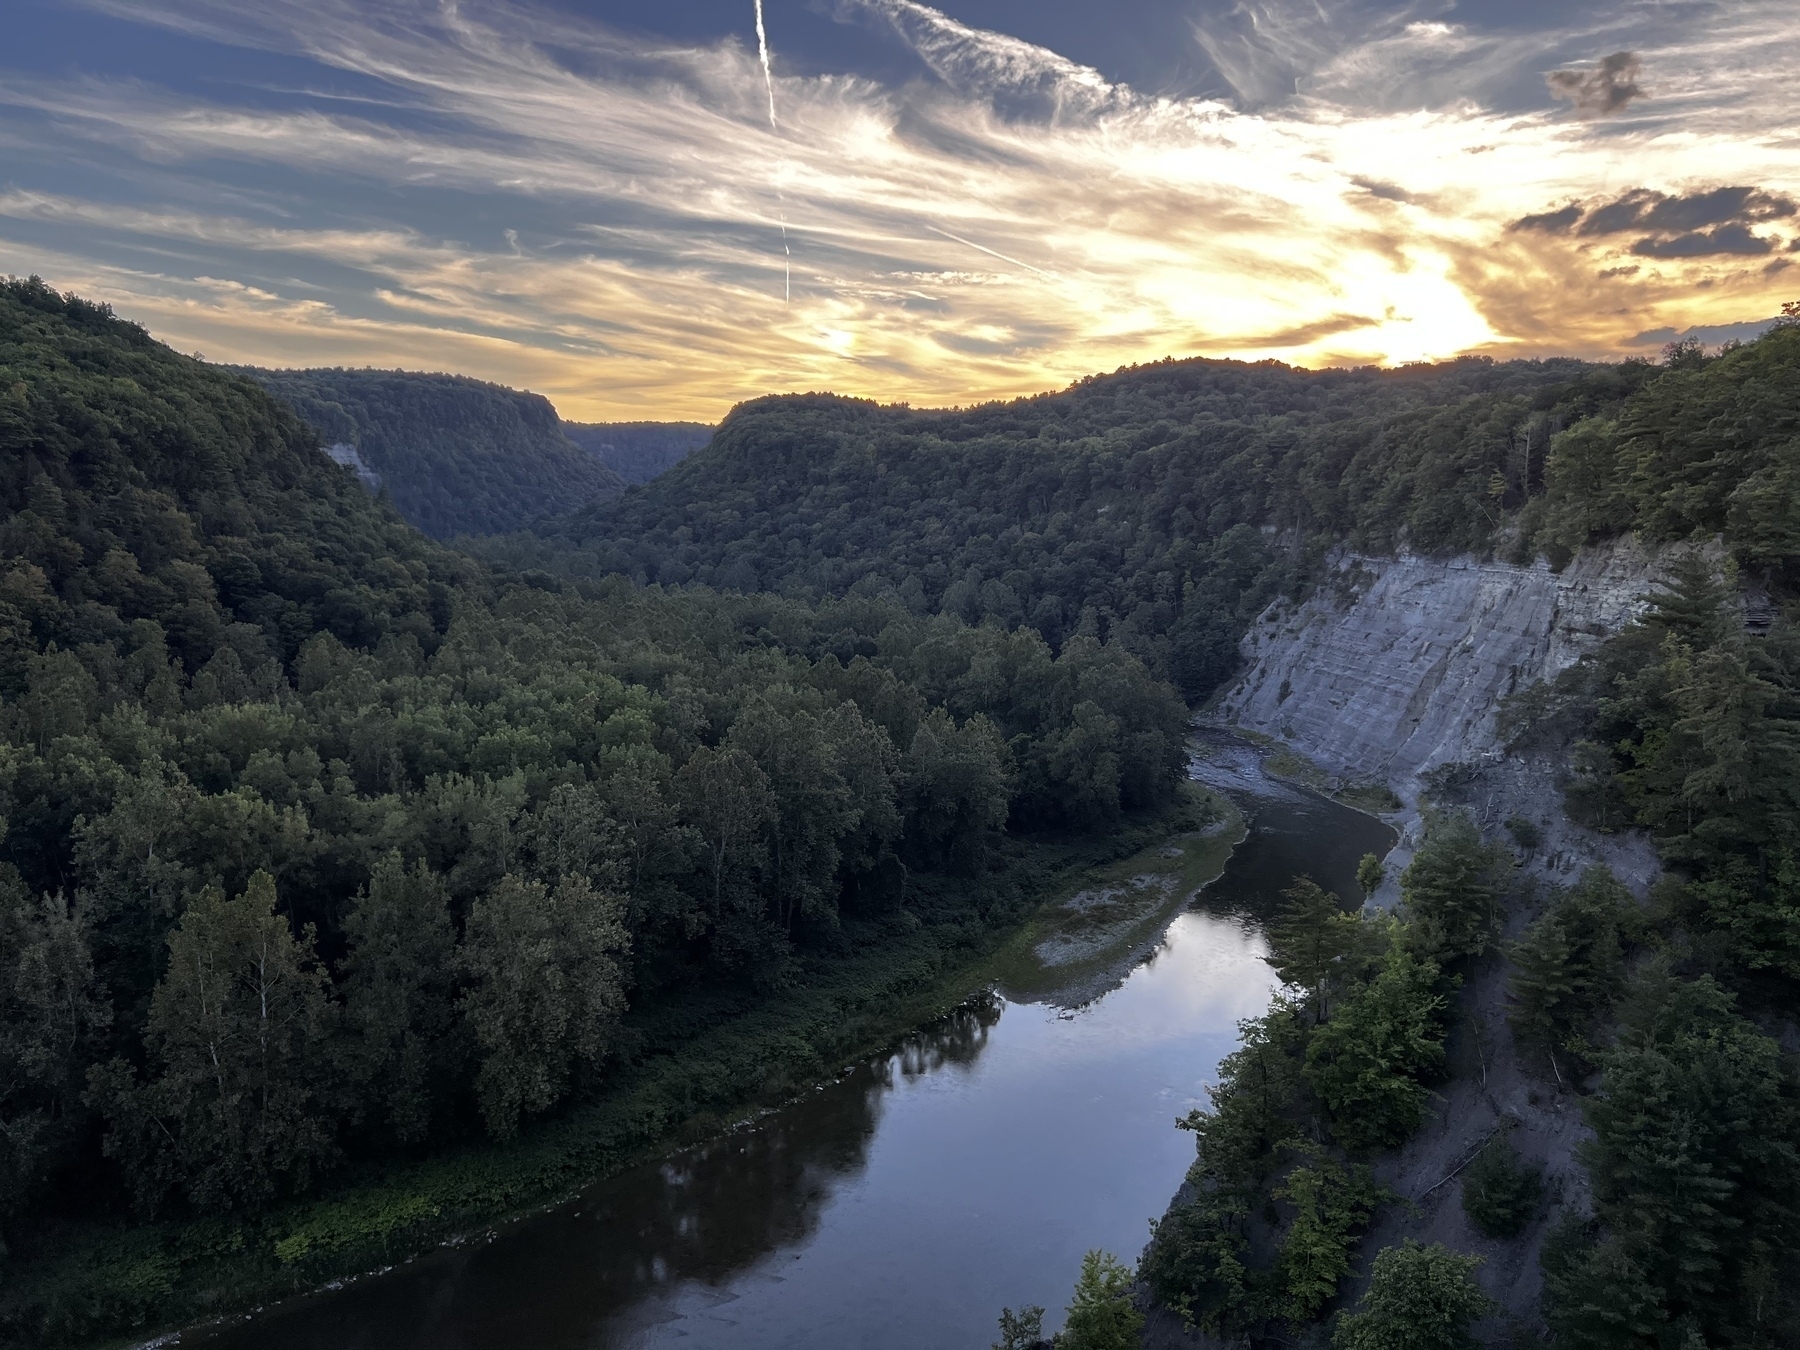 Sunset in Letchworth State Park